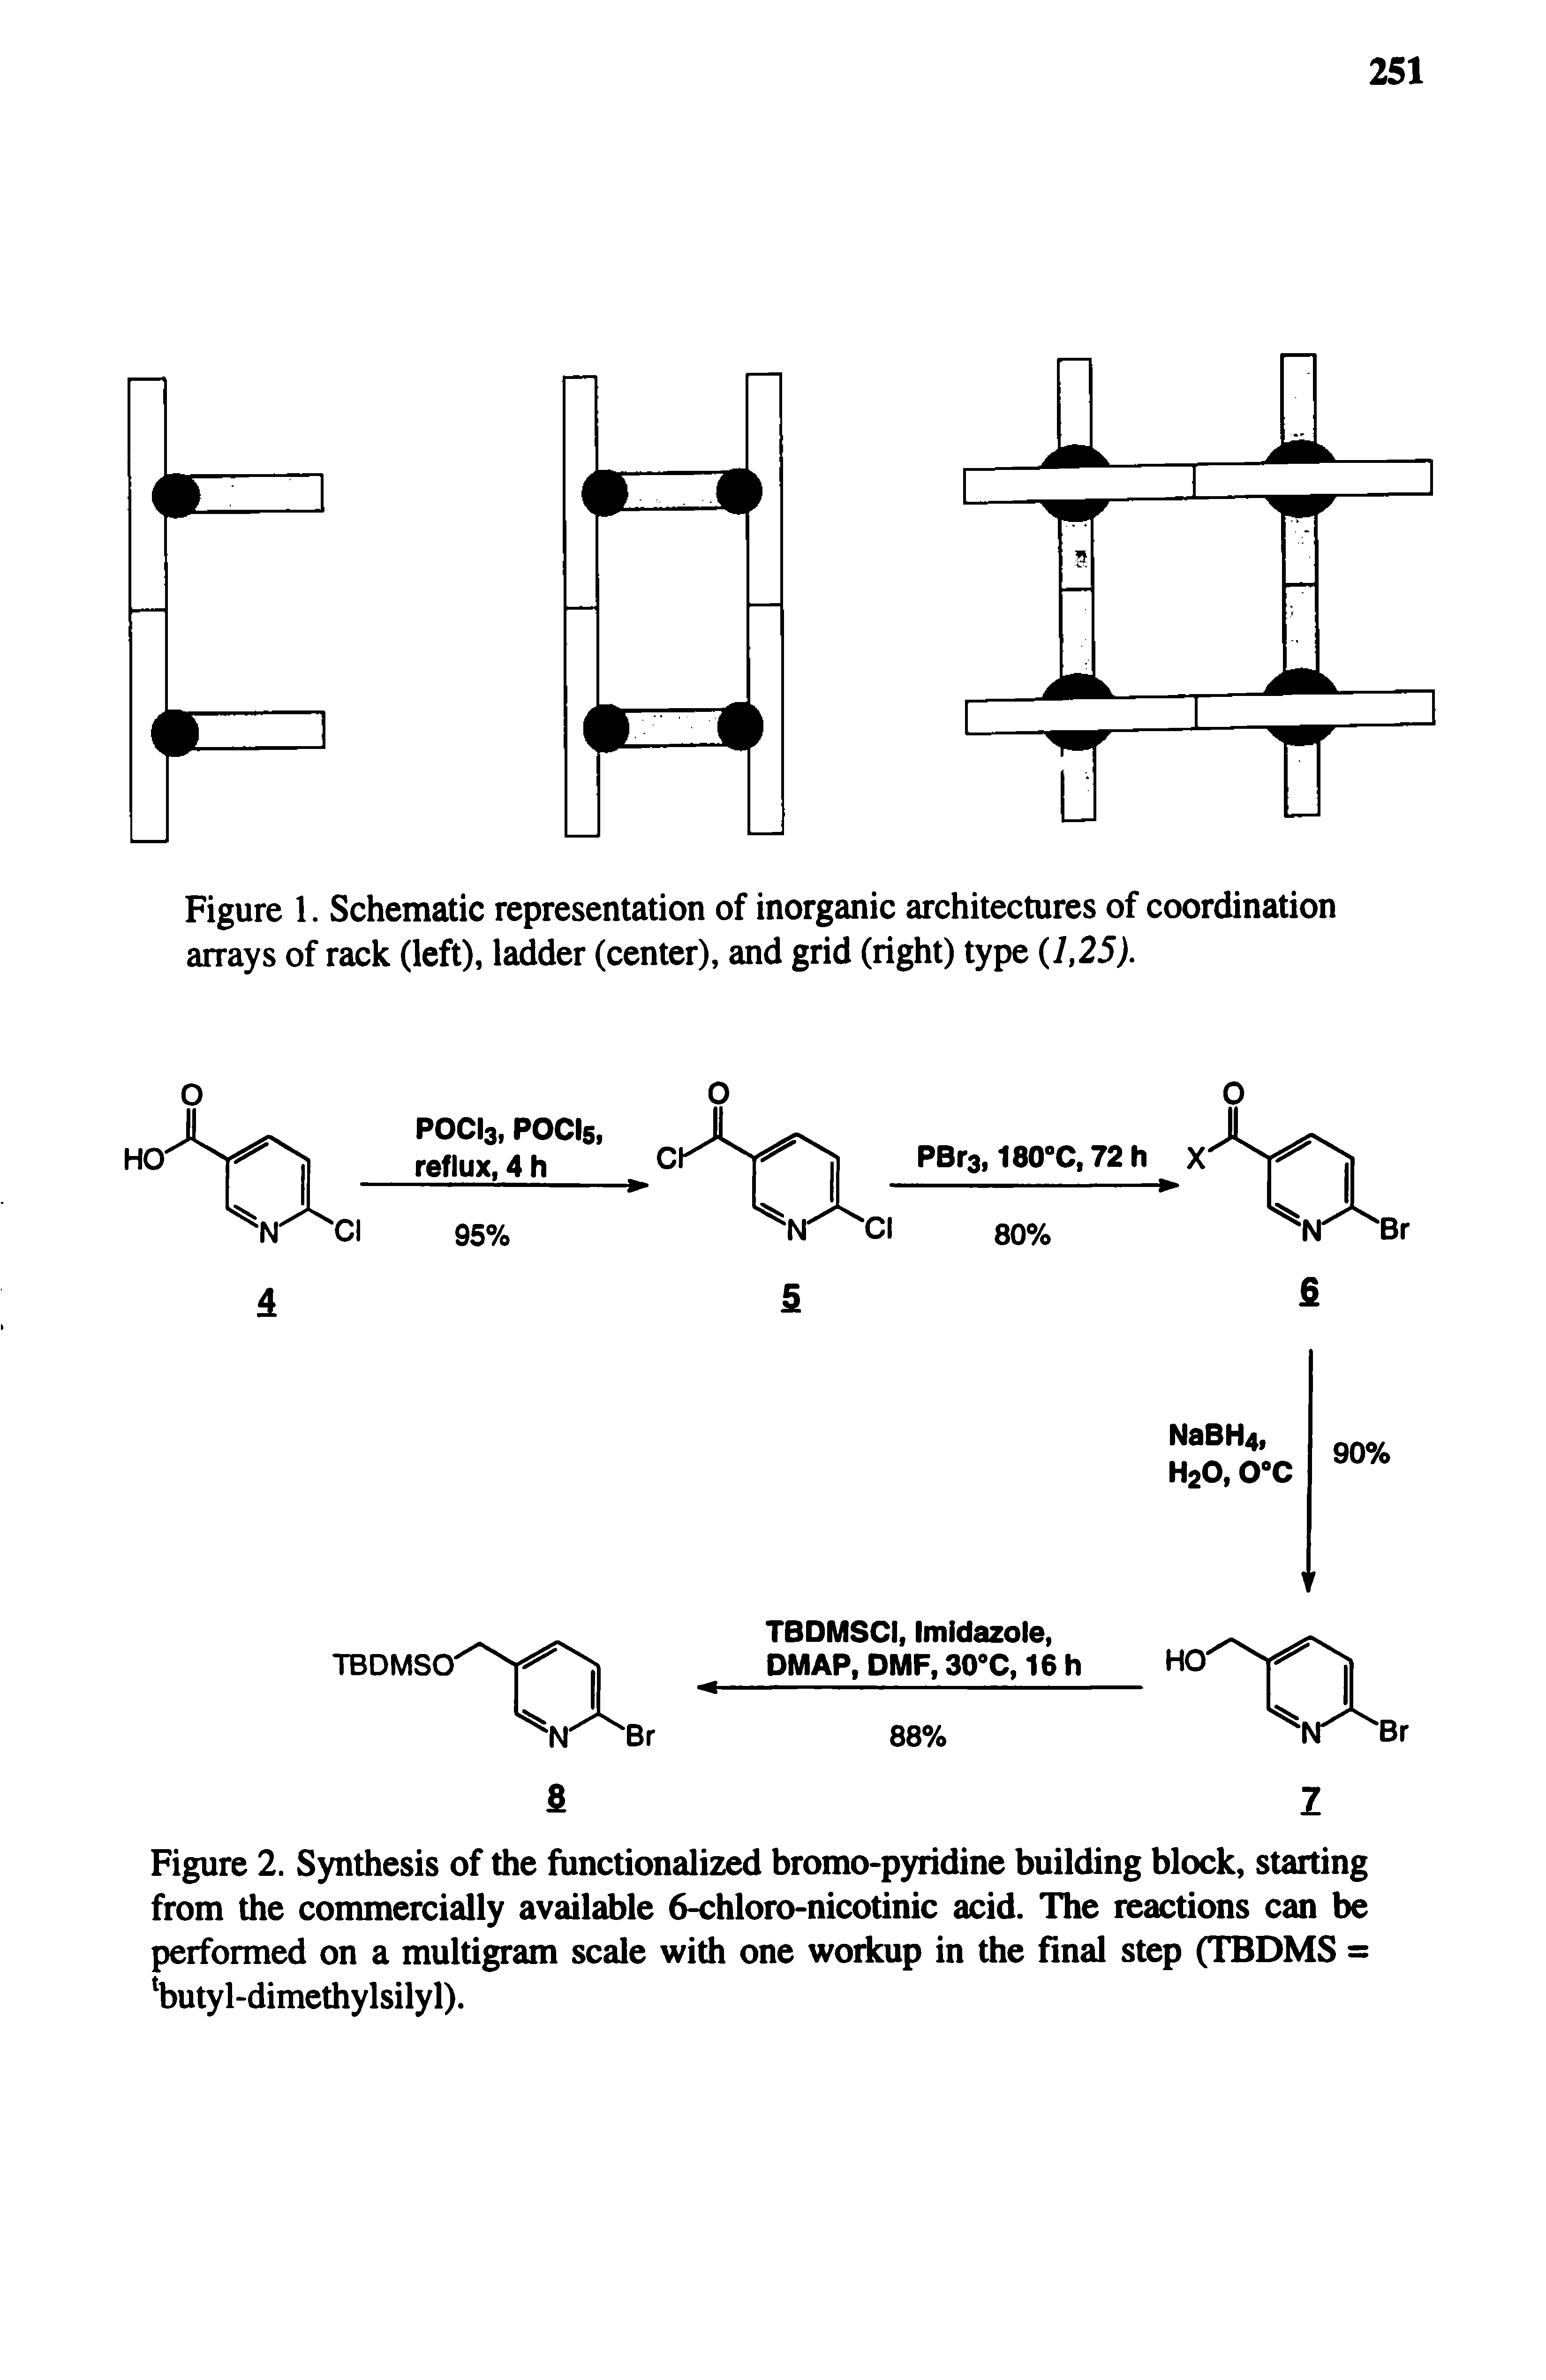 Figure 2. Synthesis of the functionalized bromo-pyridine building block, starting from the commercially available 6-chloro-nicotinic acid. The reactions can be performed on a multigram scale with one workup in the final step (TBDMS = butyl-dimethylsilyl).